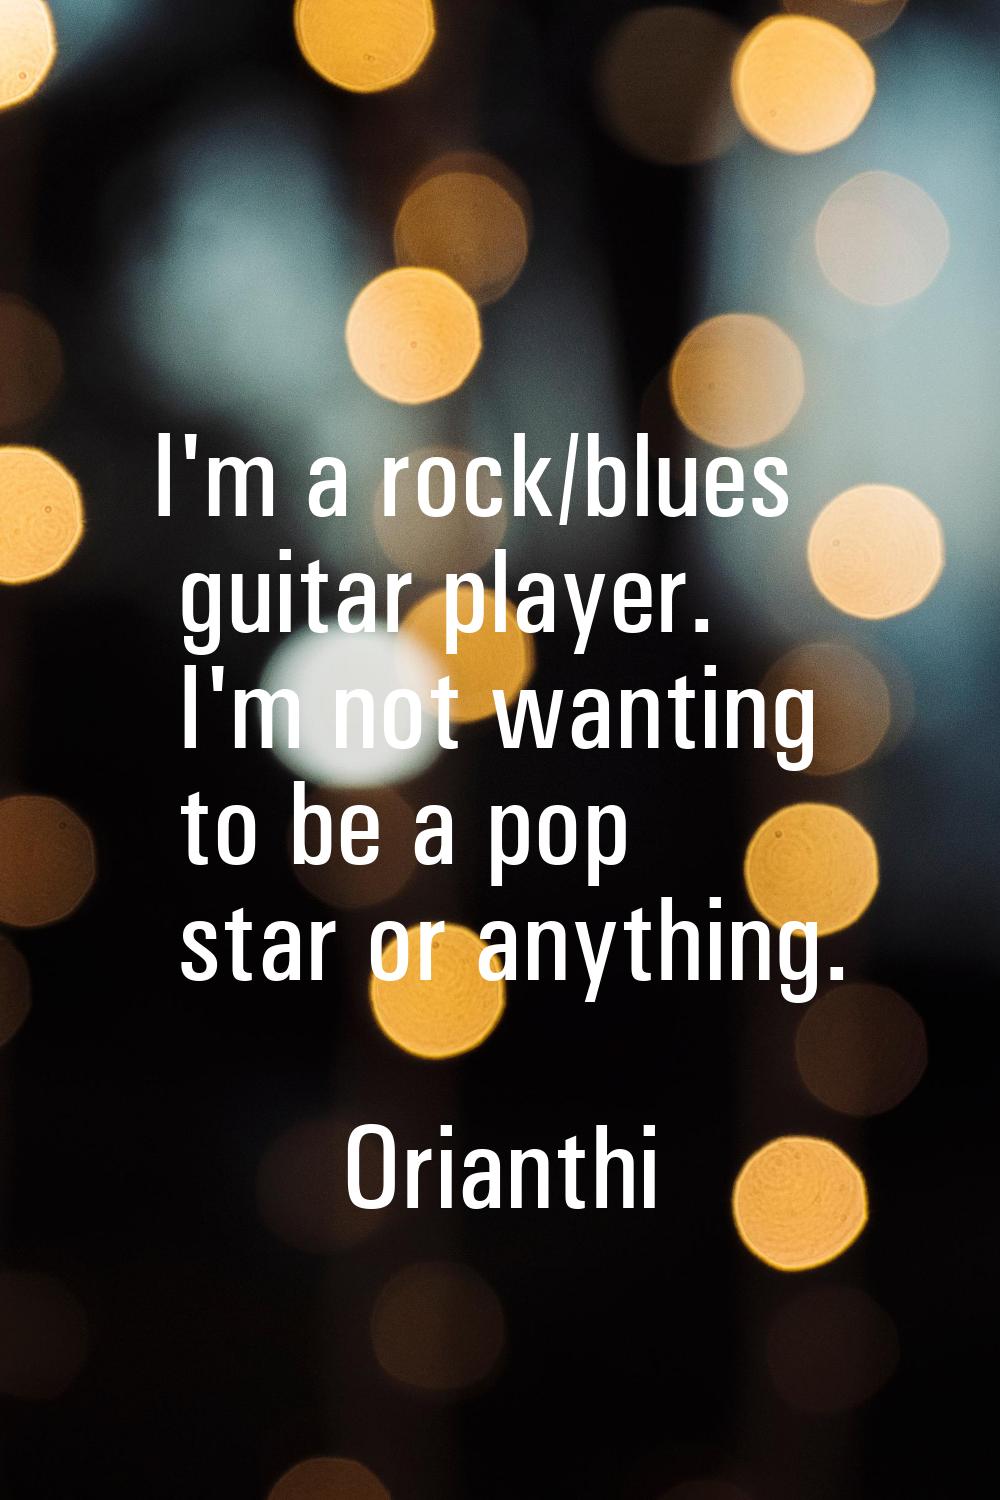 I'm a rock/blues guitar player. I'm not wanting to be a pop star or anything.